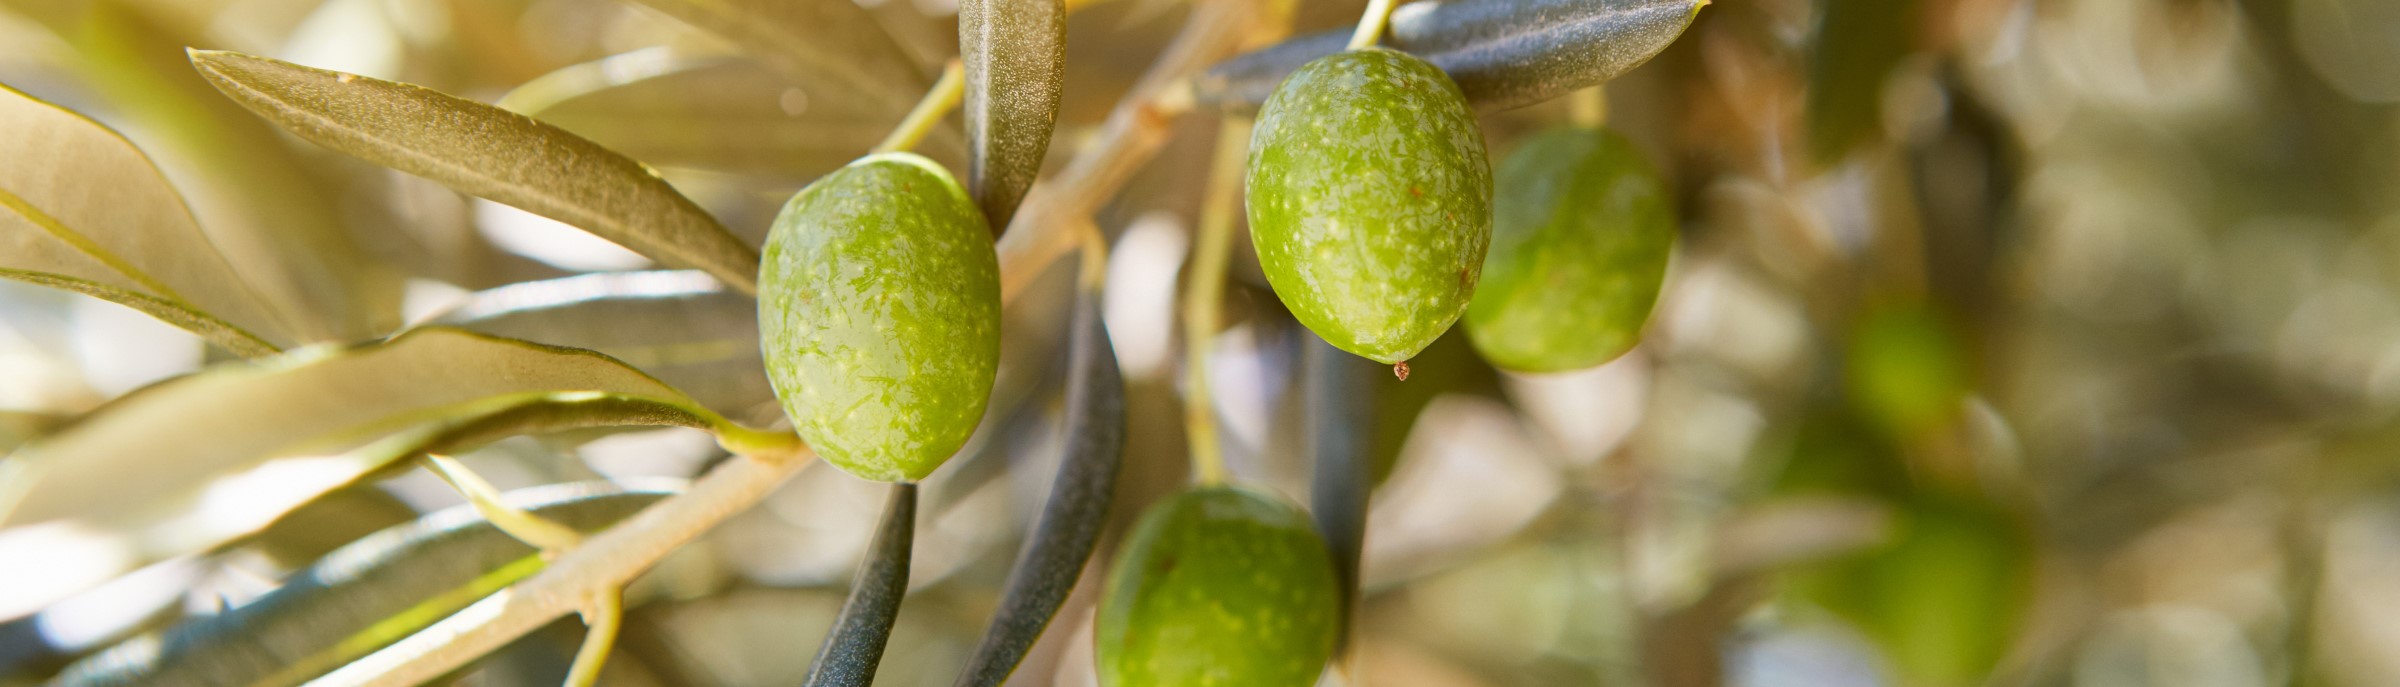 Close up of olive tree bearing olives ready for olive oil extraction